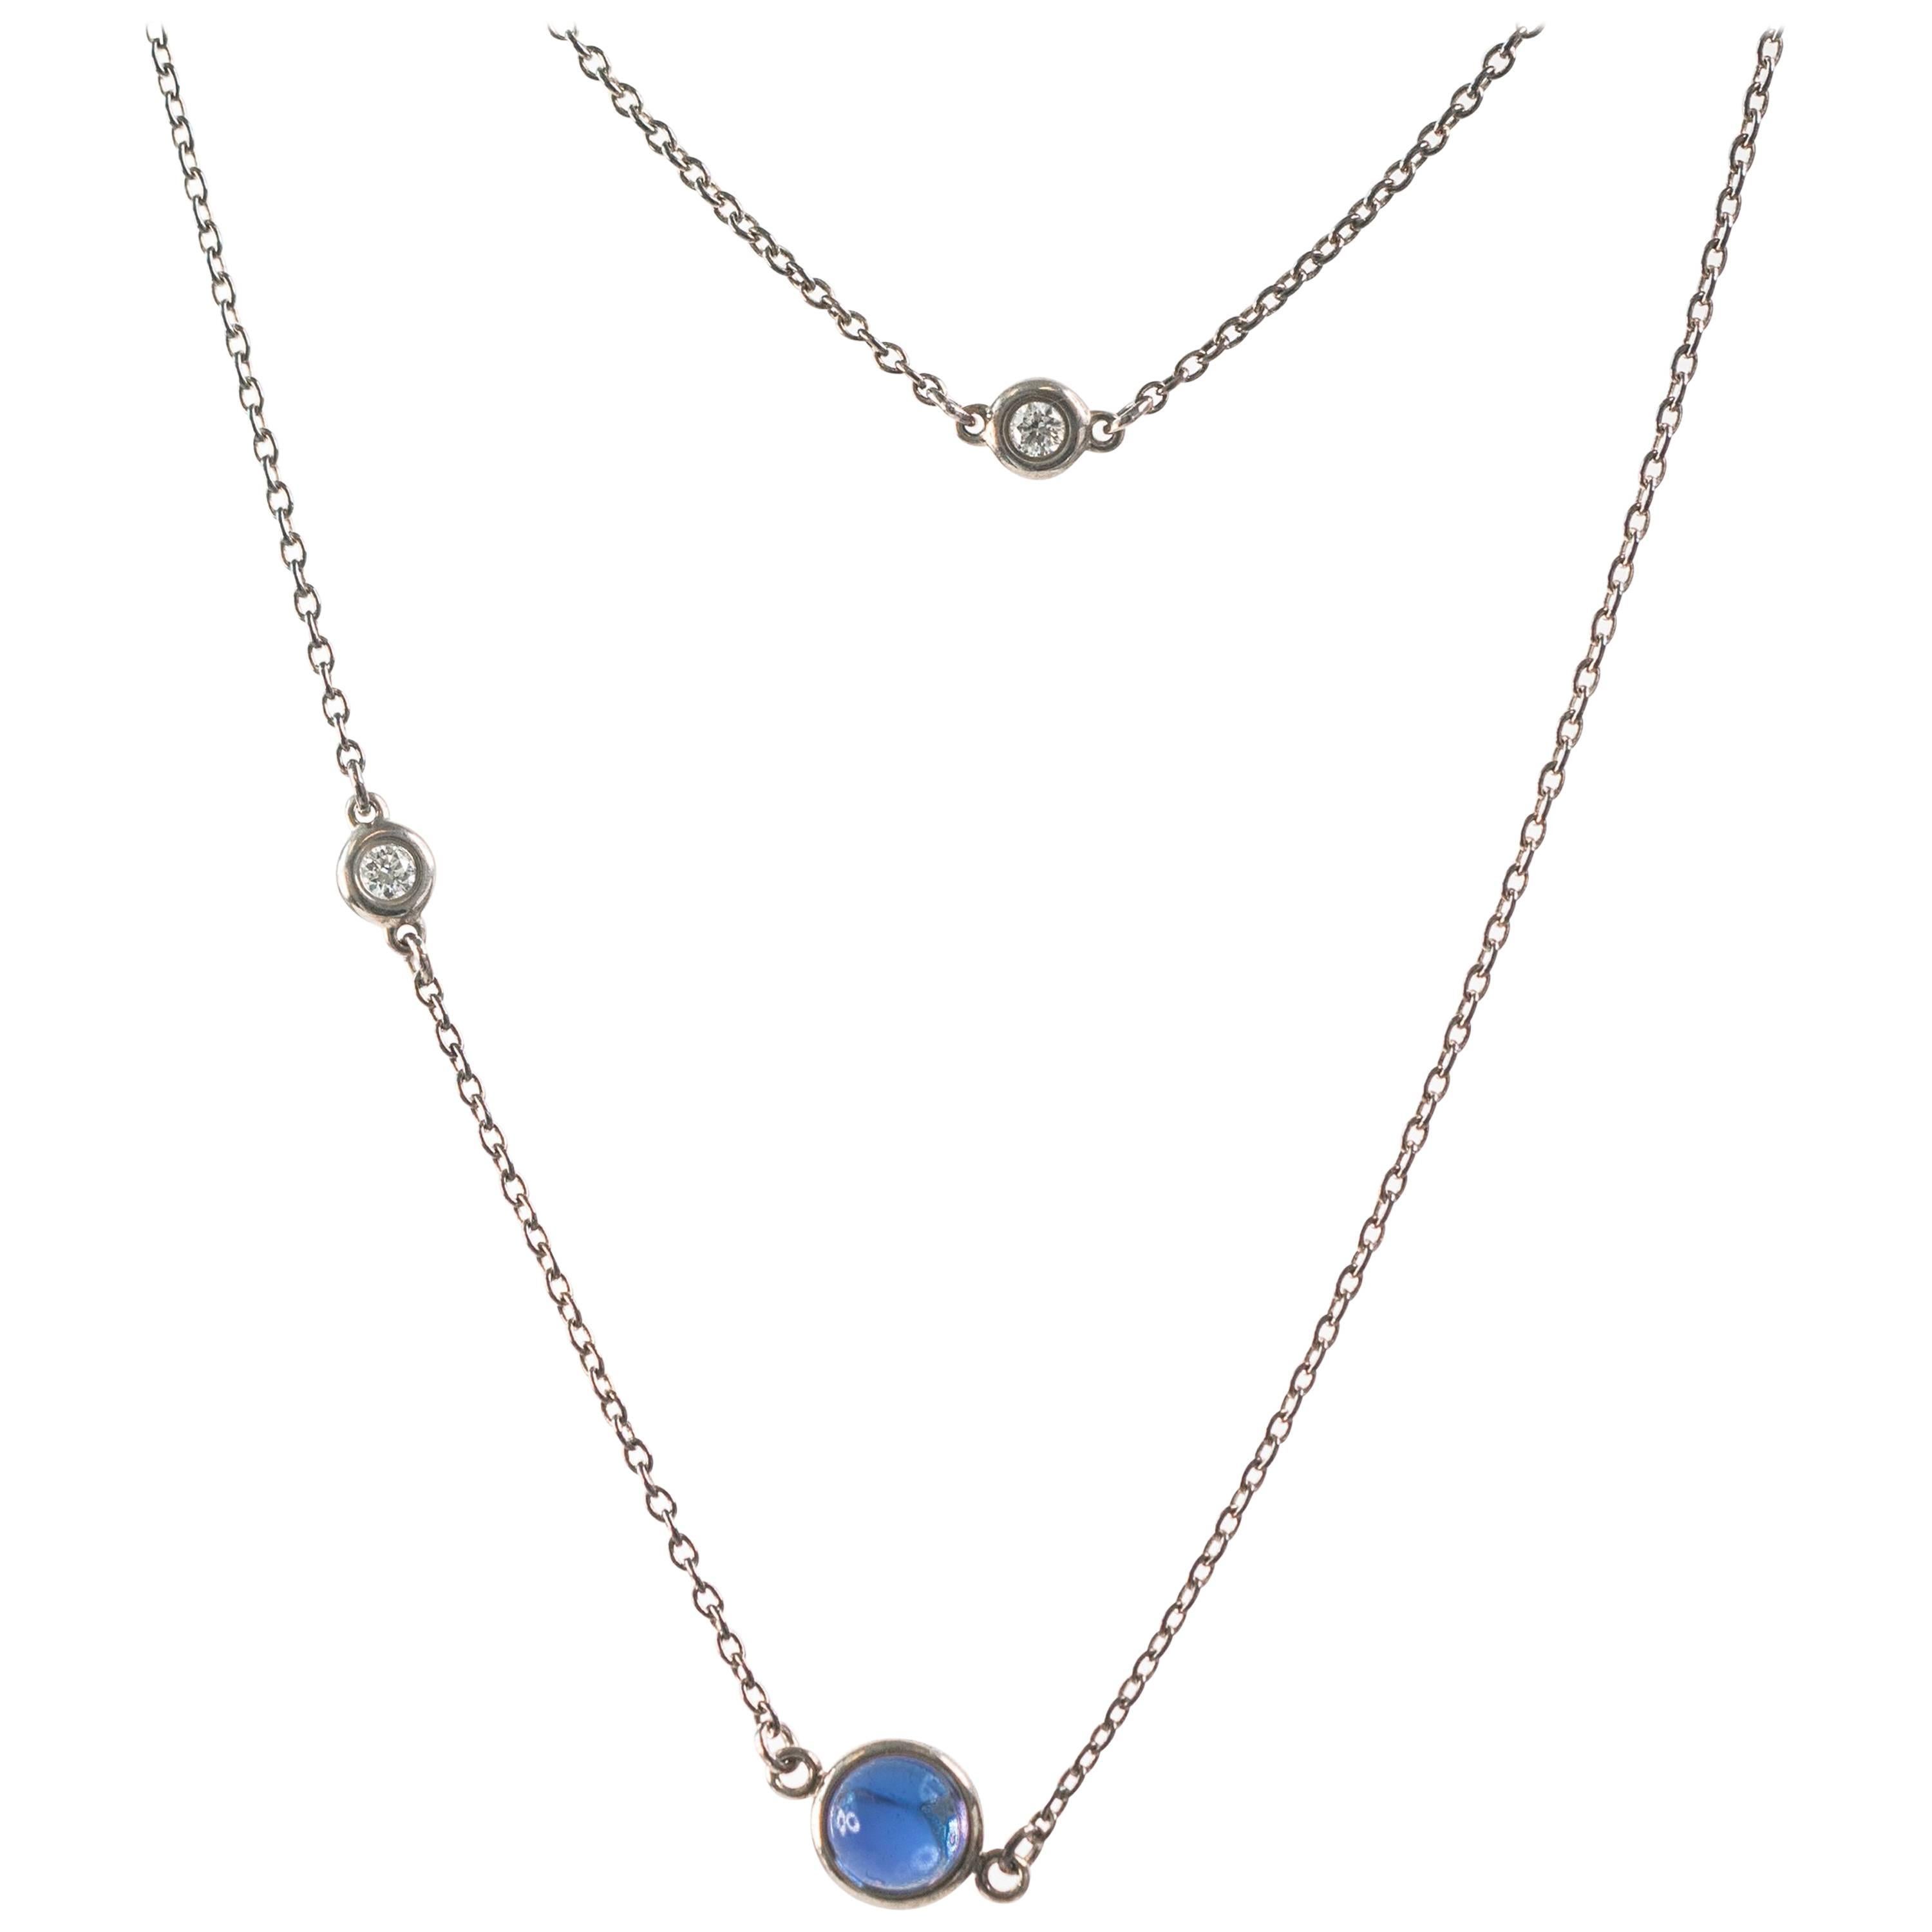 Tiffany & Co. Diamond and Blue Sapphire Necklace